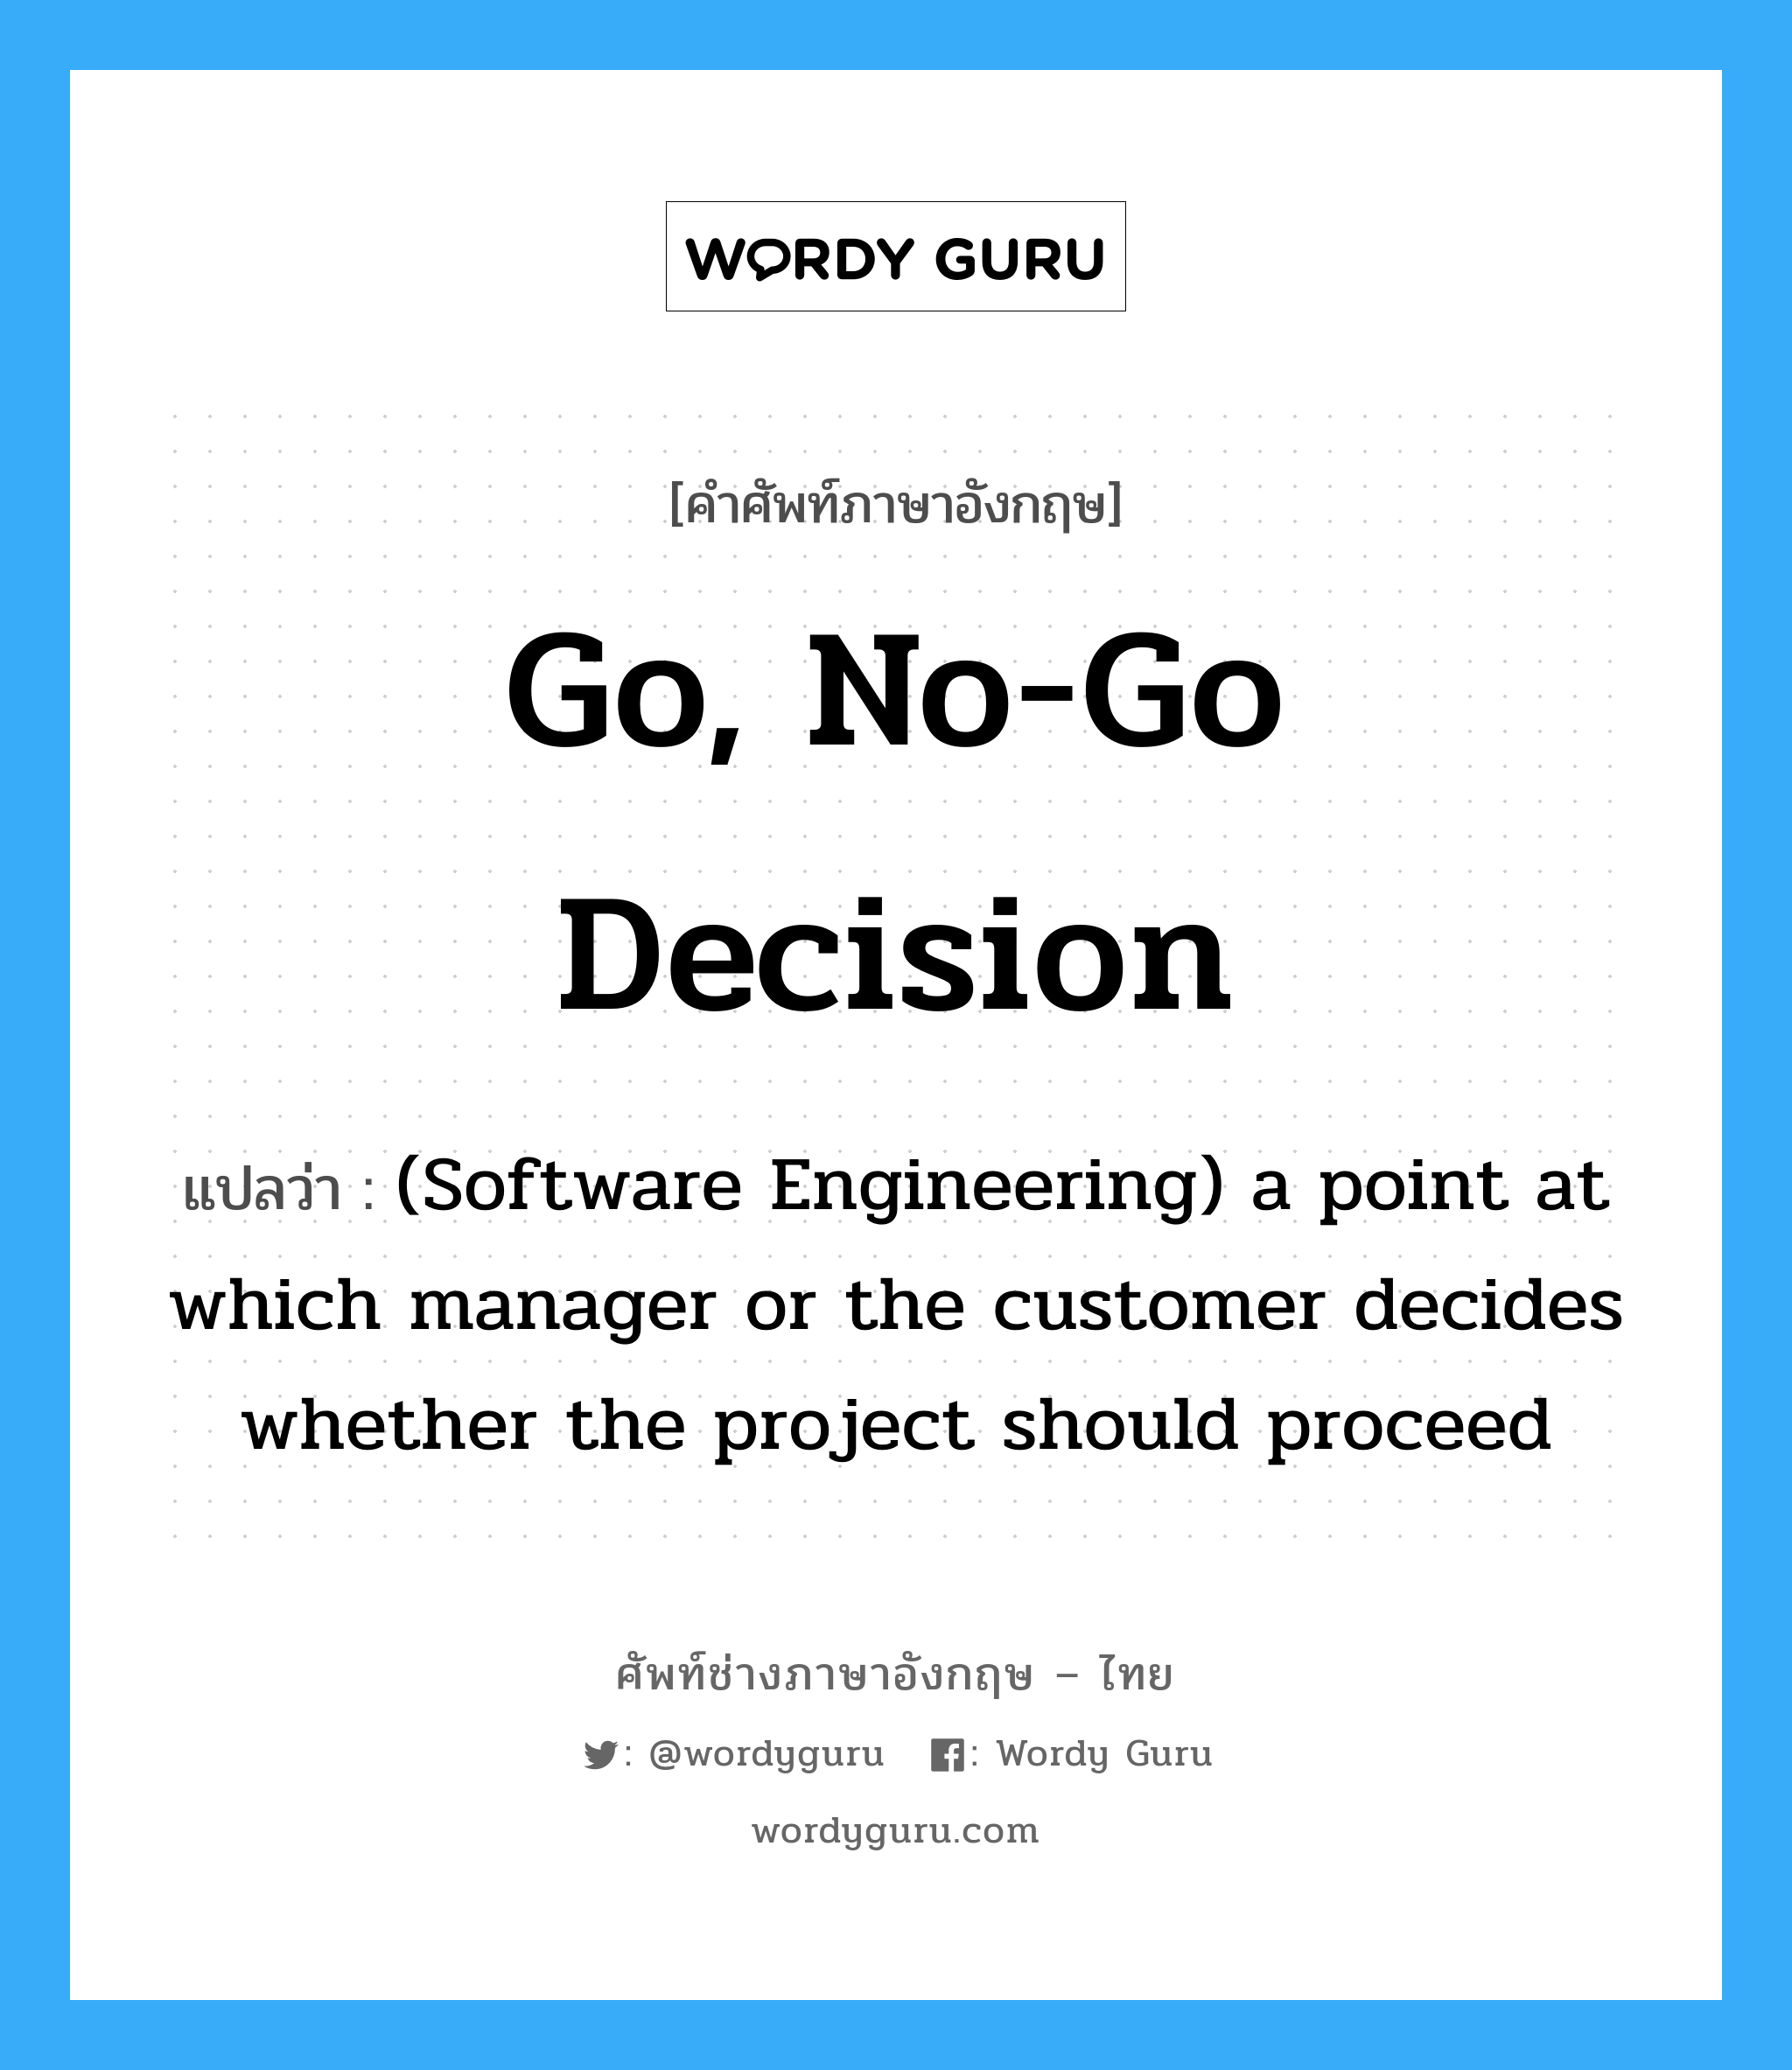 (Software Engineering) a point at which manager or the customer decides whether the project should proceed ภาษาอังกฤษ?, คำศัพท์ช่างภาษาอังกฤษ - ไทย (Software Engineering) a point at which manager or the customer decides whether the project should proceed คำศัพท์ภาษาอังกฤษ (Software Engineering) a point at which manager or the customer decides whether the project should proceed แปลว่า Go, no-go decision